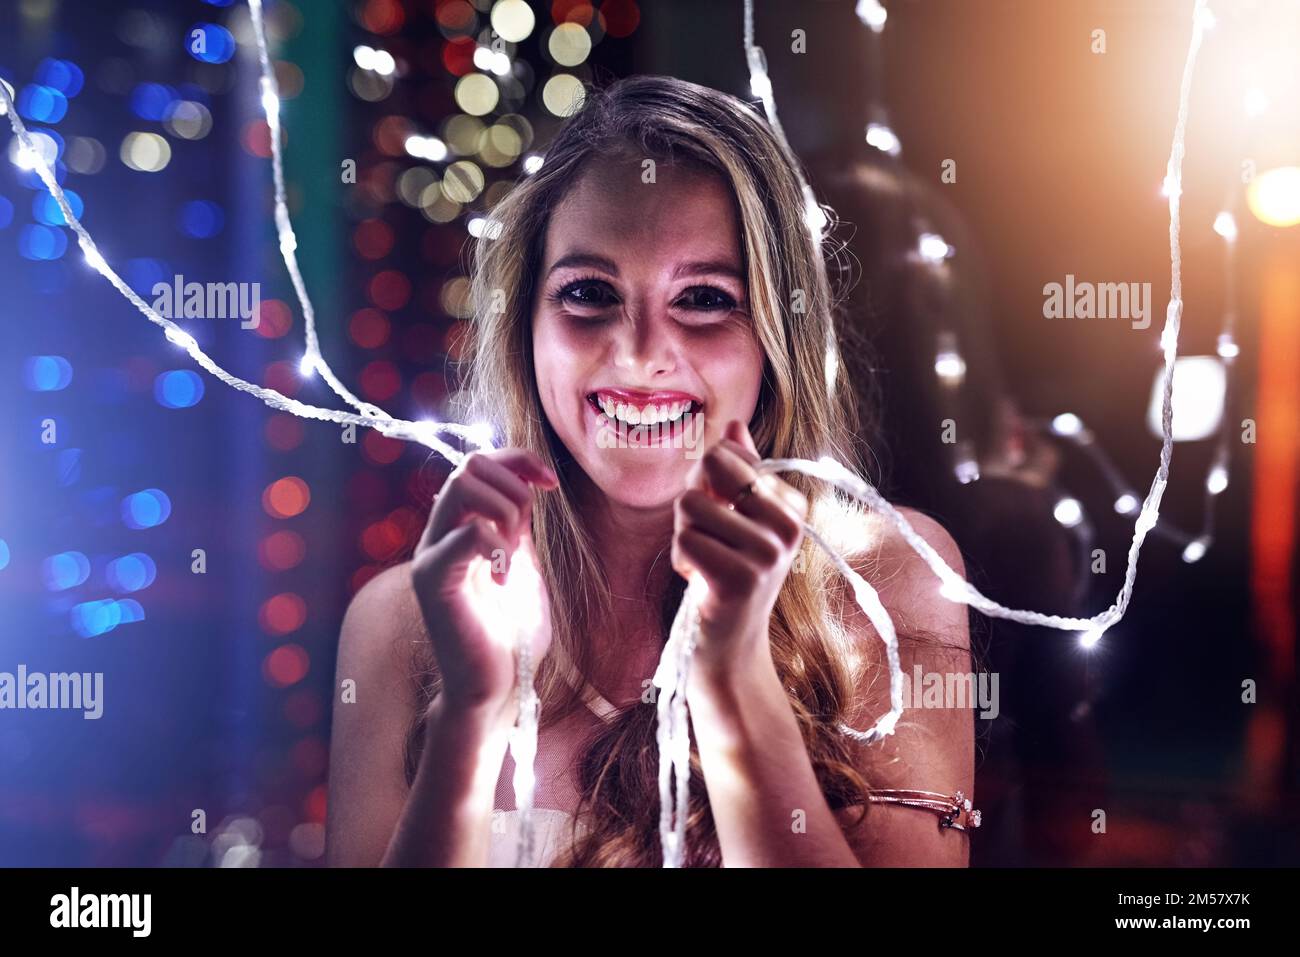 Lighting up the night. Portrait of a happy young woman playing with string lights in a night club. Stock Photo